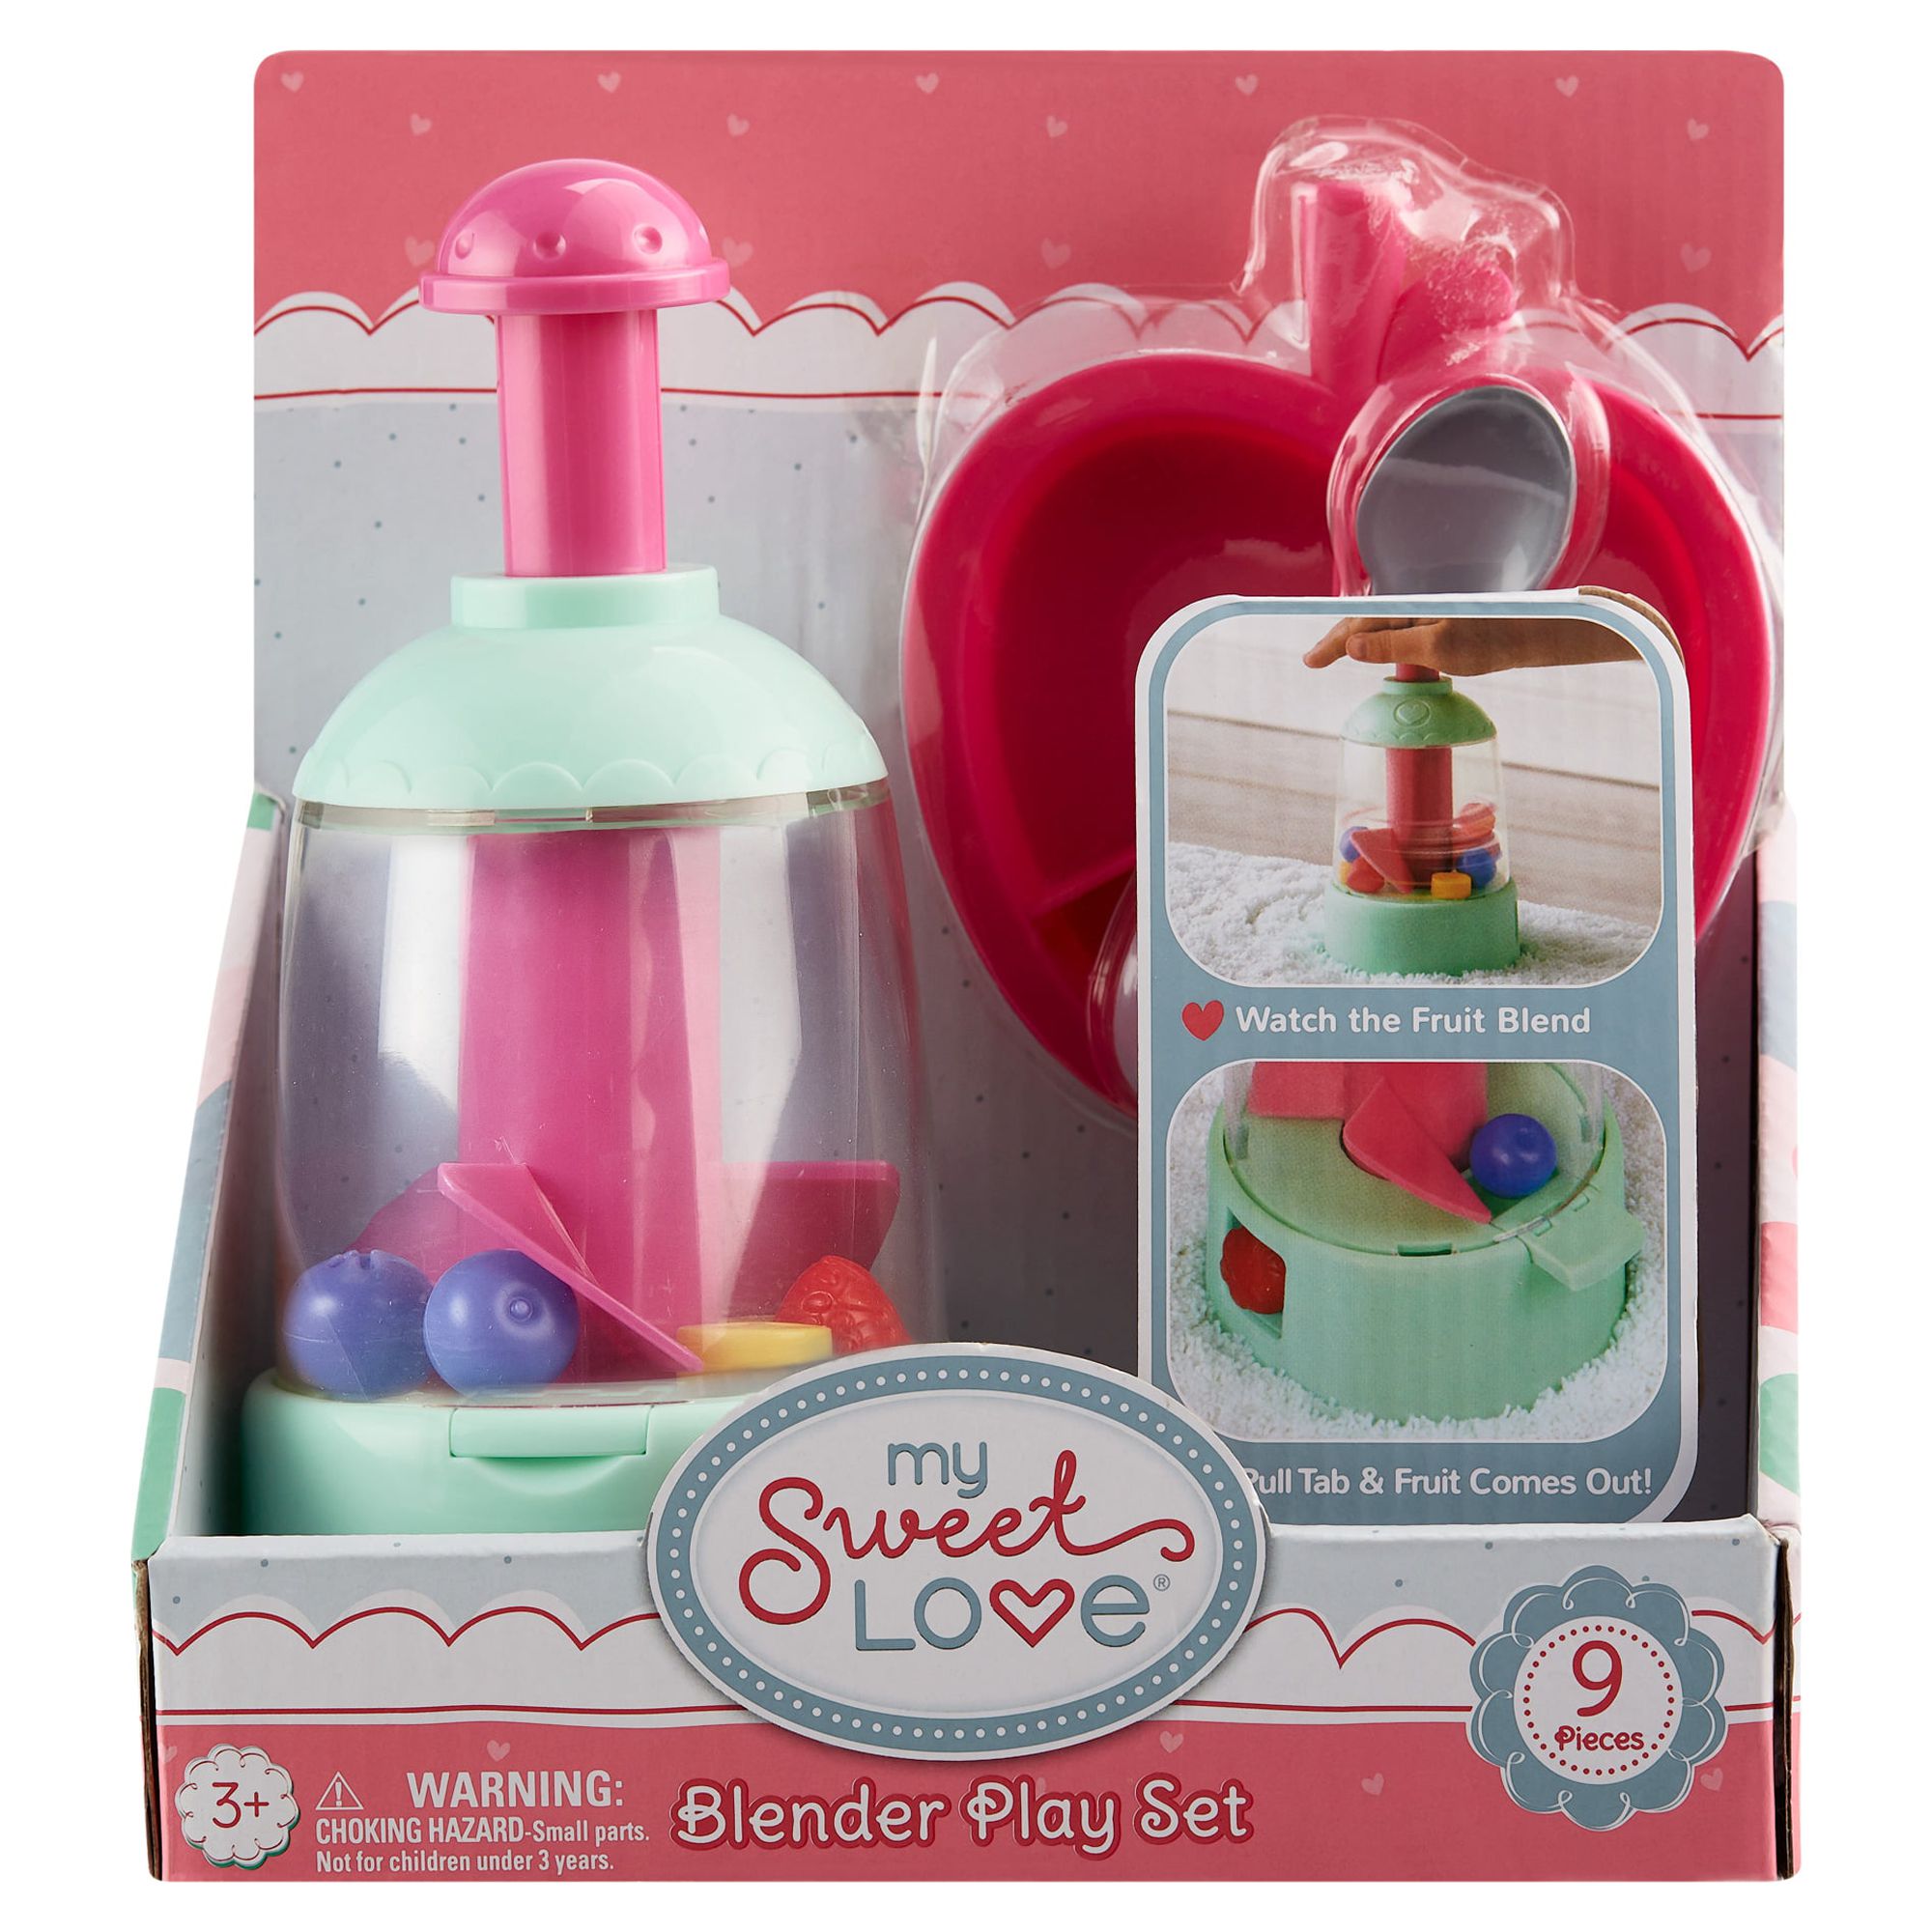 My Sweet Love Food Blender Toy Accessory Play Set, 9 Pieces - image 5 of 5